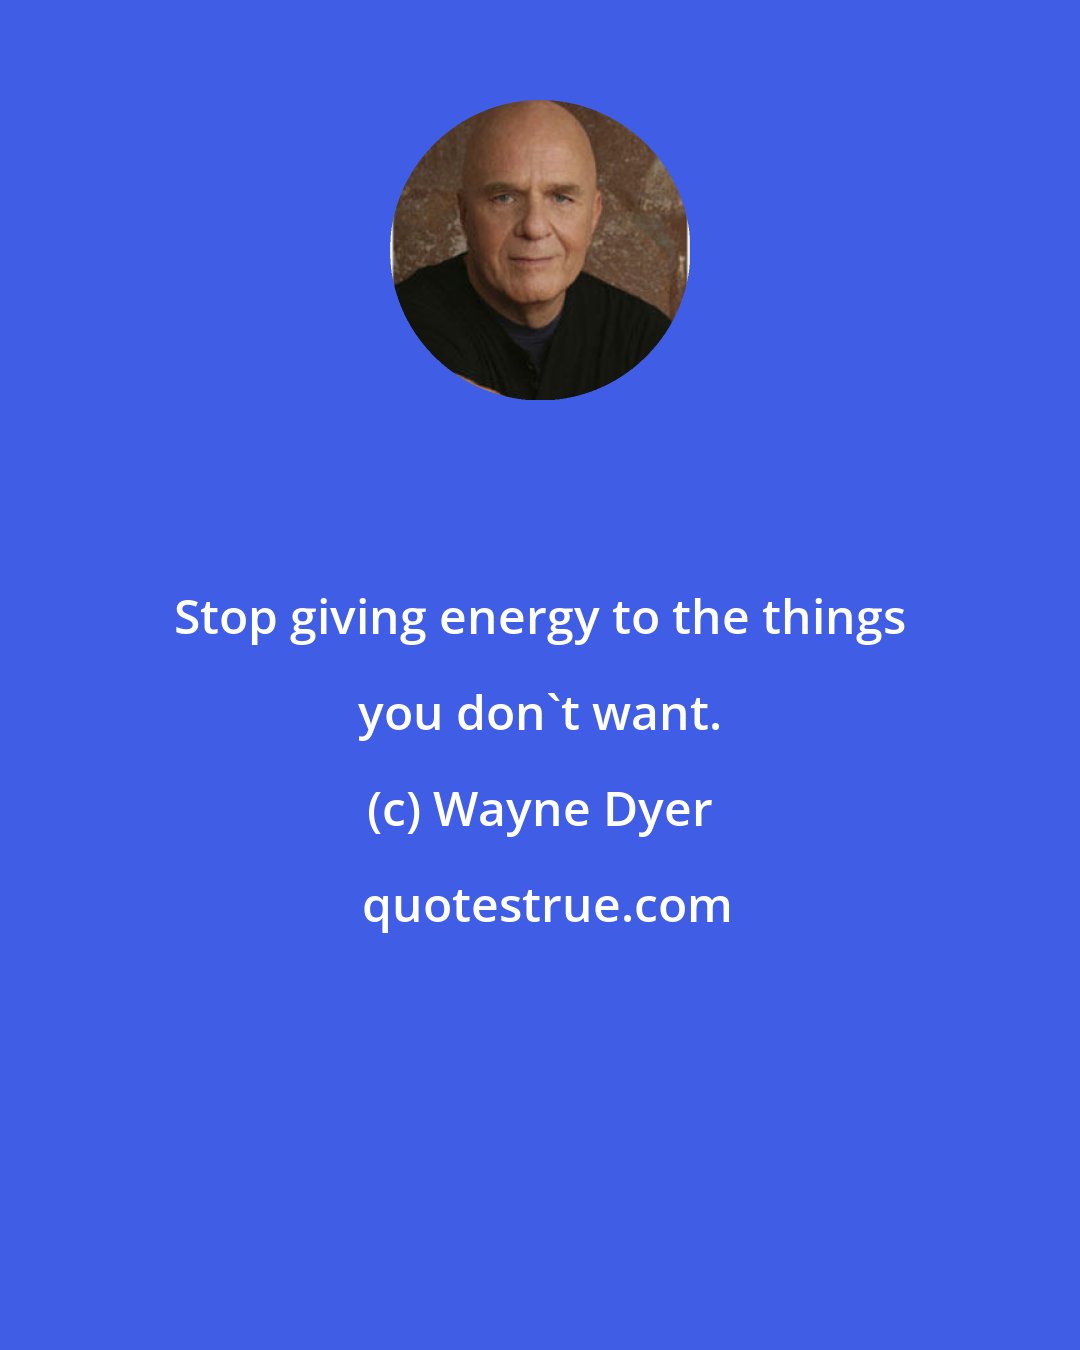 Wayne Dyer: Stop giving energy to the things you don't want.